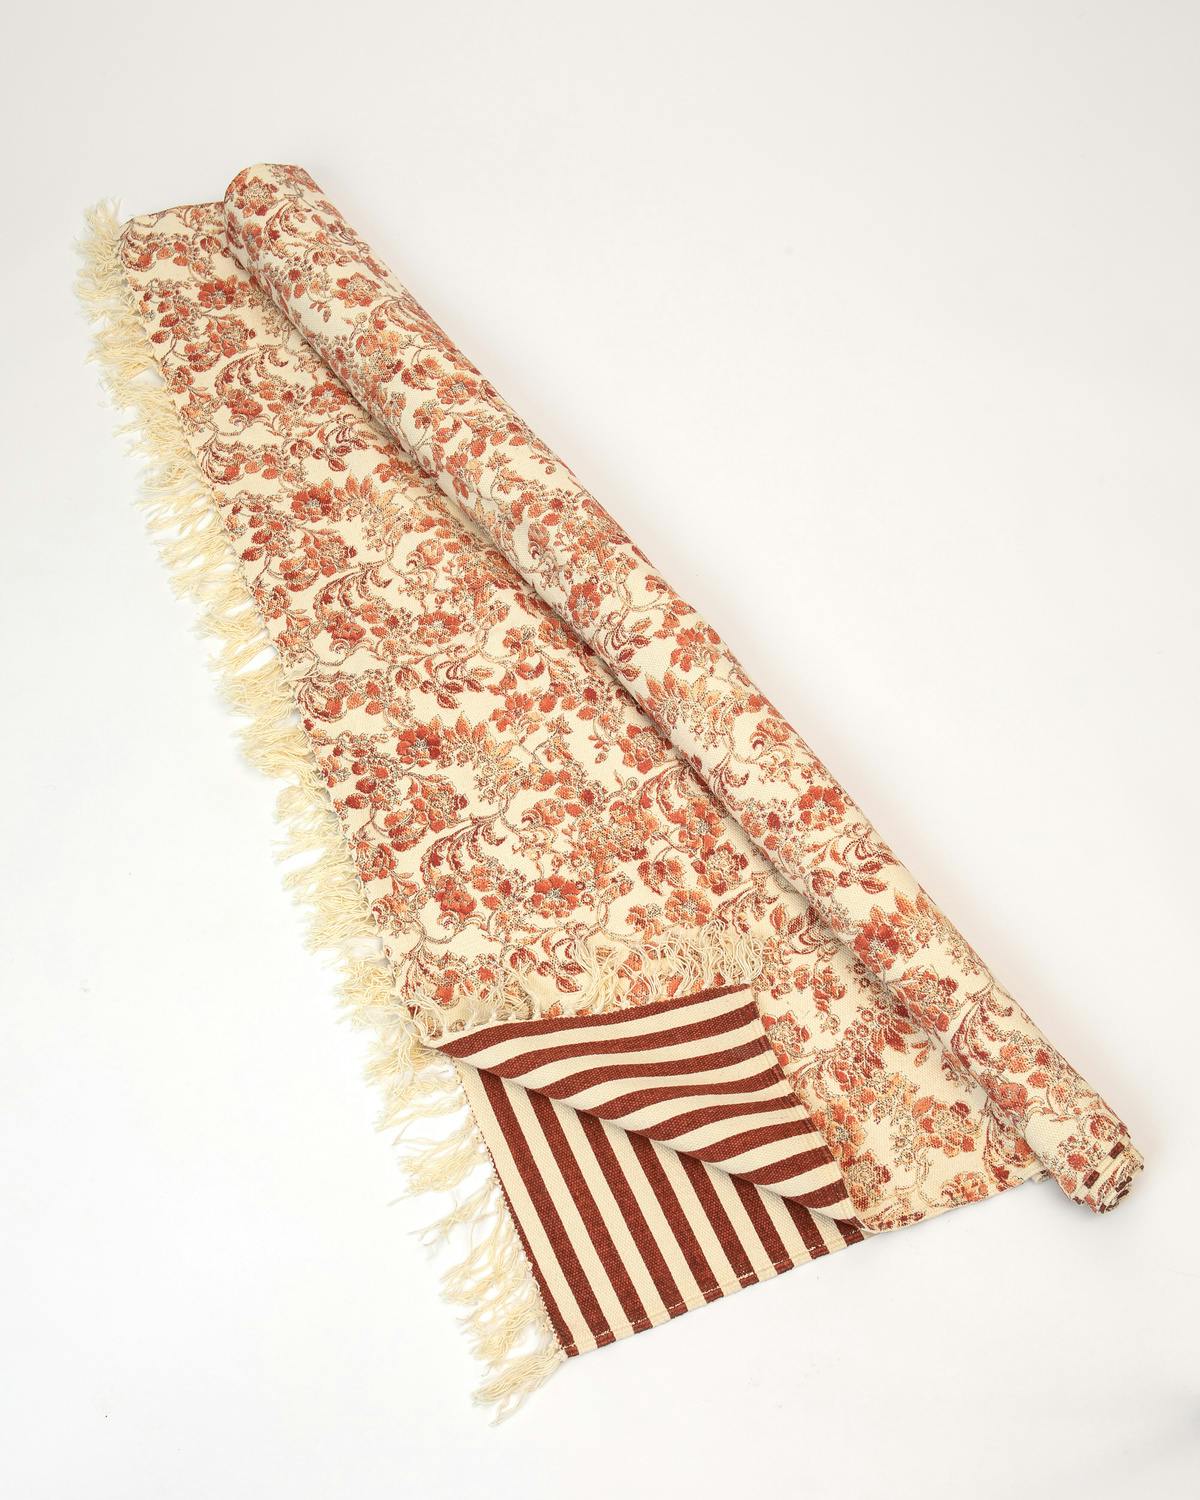 Big Rug (In store exclusive), Delicate. Image #1